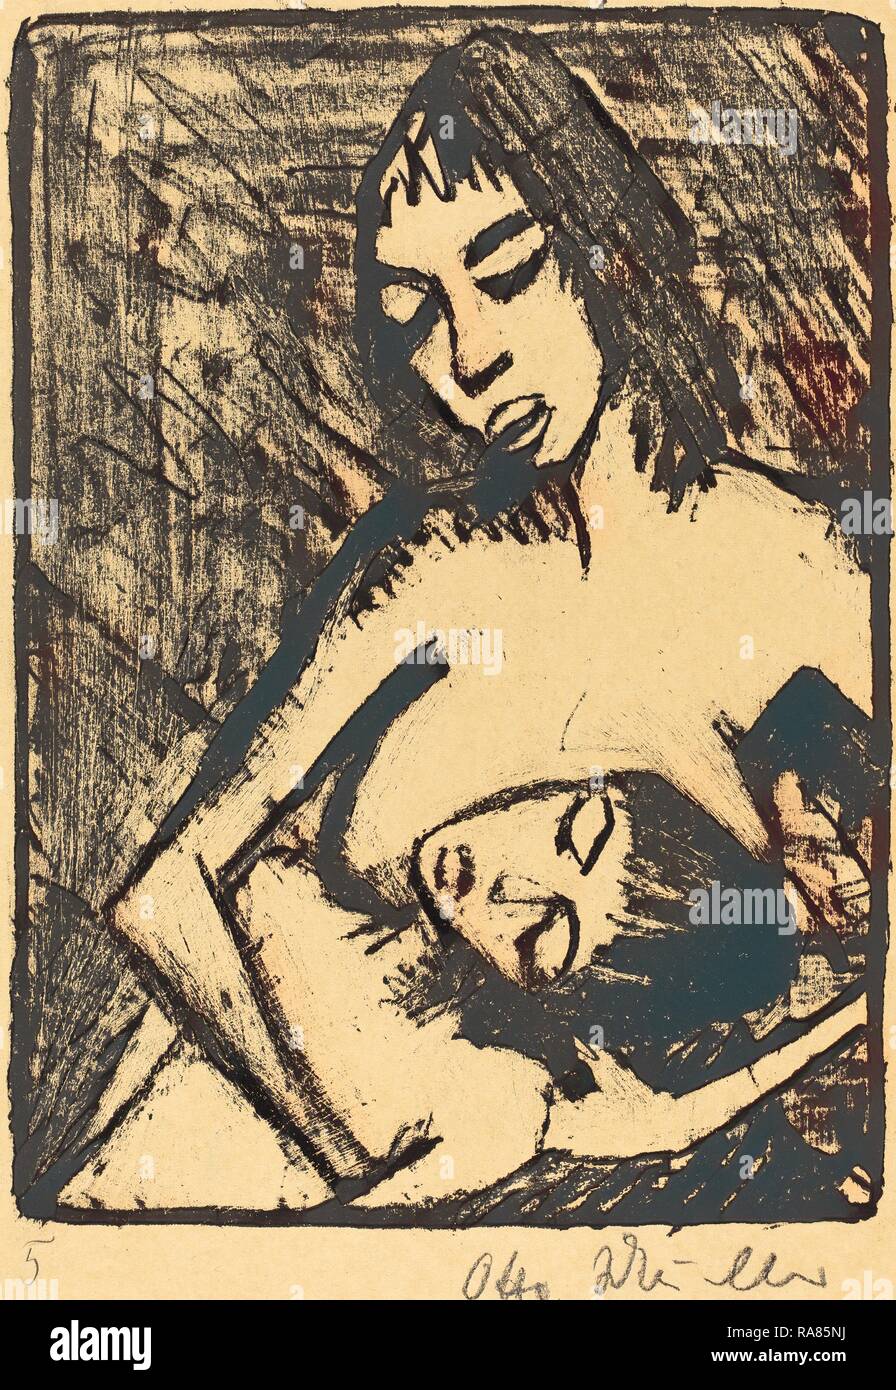 Otto Müller, Mother and Child (Mutter und Kind), German, 1874 - 1930, probably 1920, lithograph. Reimagined Stock Photo